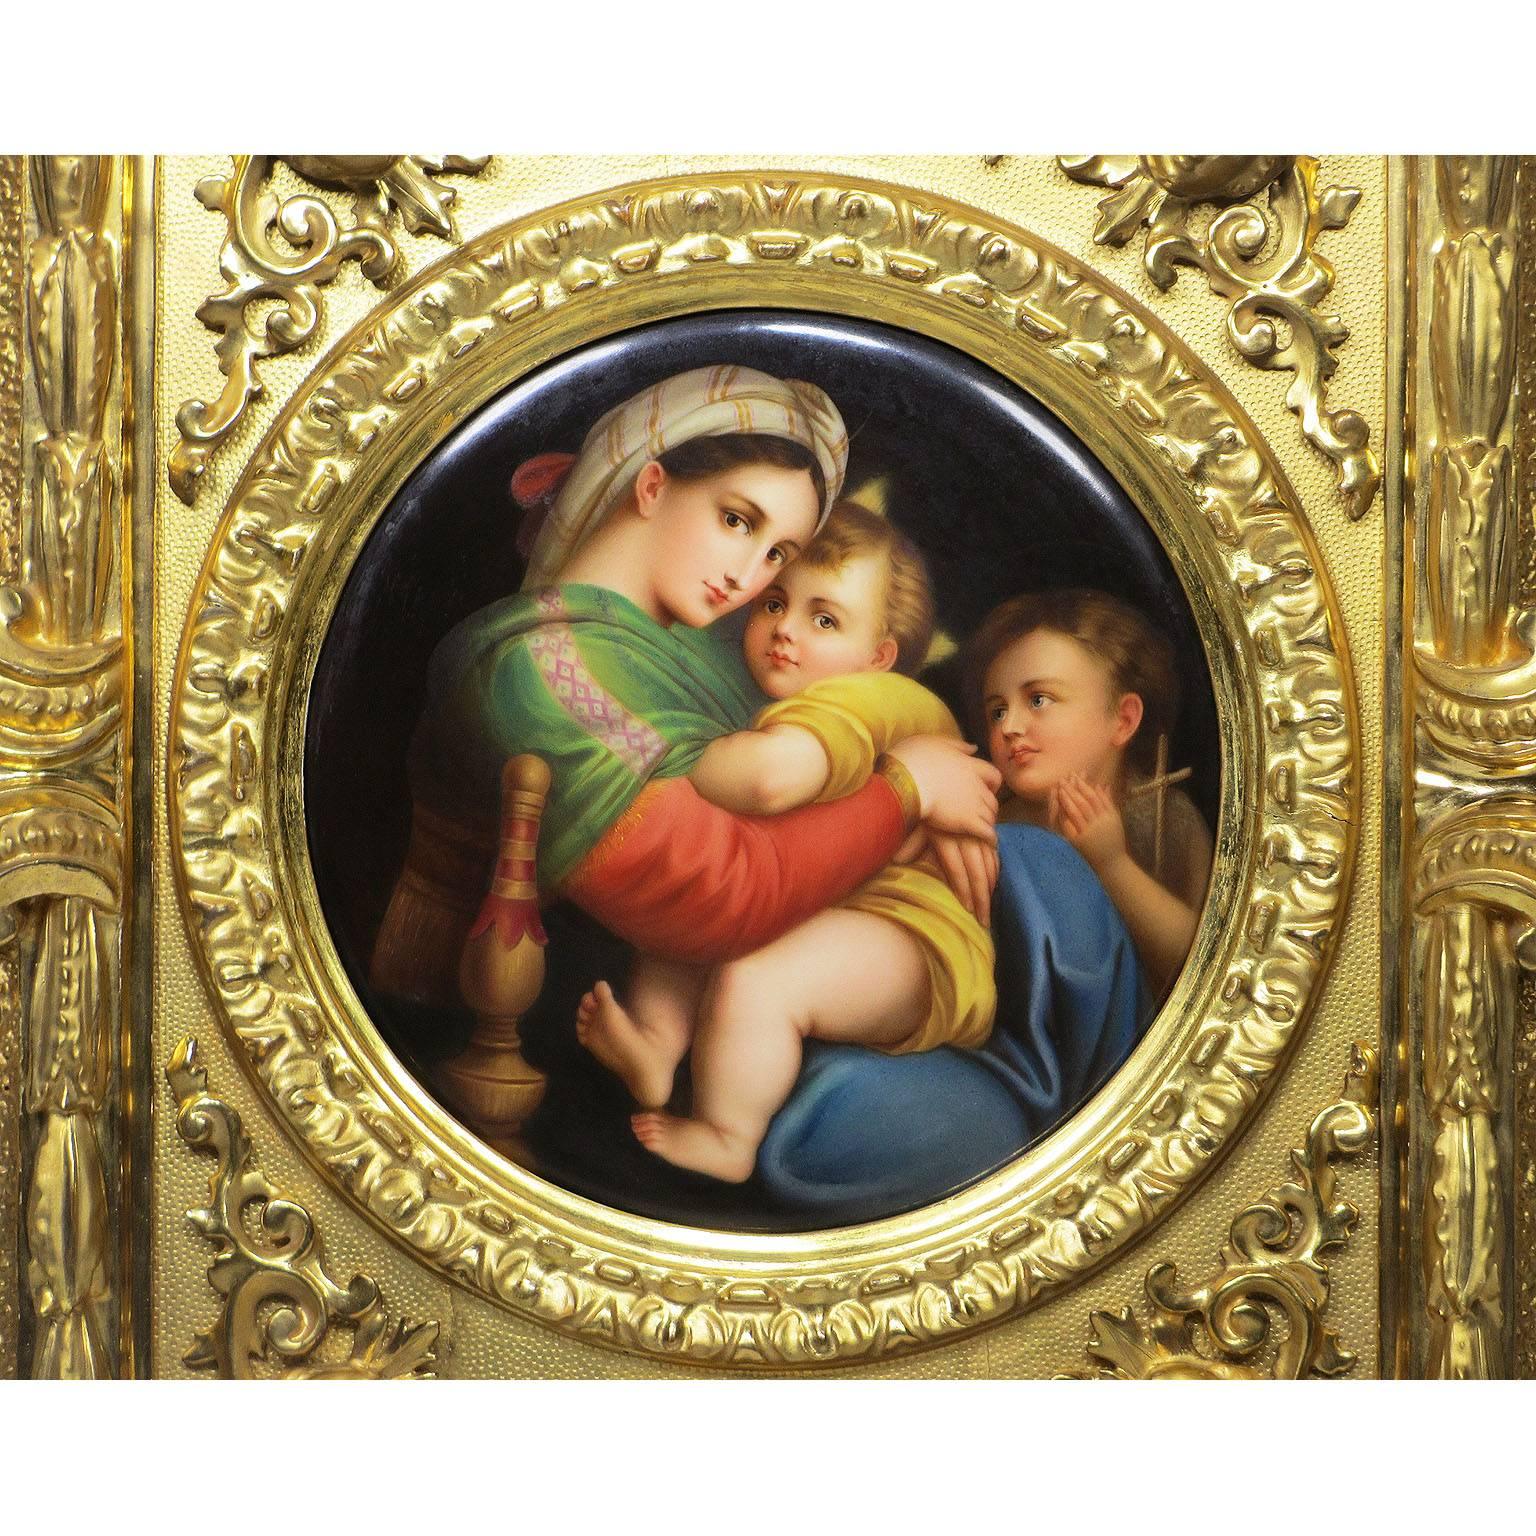 A very fine German 19th century circular porcelain plaque painting of La Madonna della Sedia after Raphael Sanzio (1483-1520), depicting a seated Madonna and child next to a child Saint John the Baptist, within a giltwood carved figural frame, the